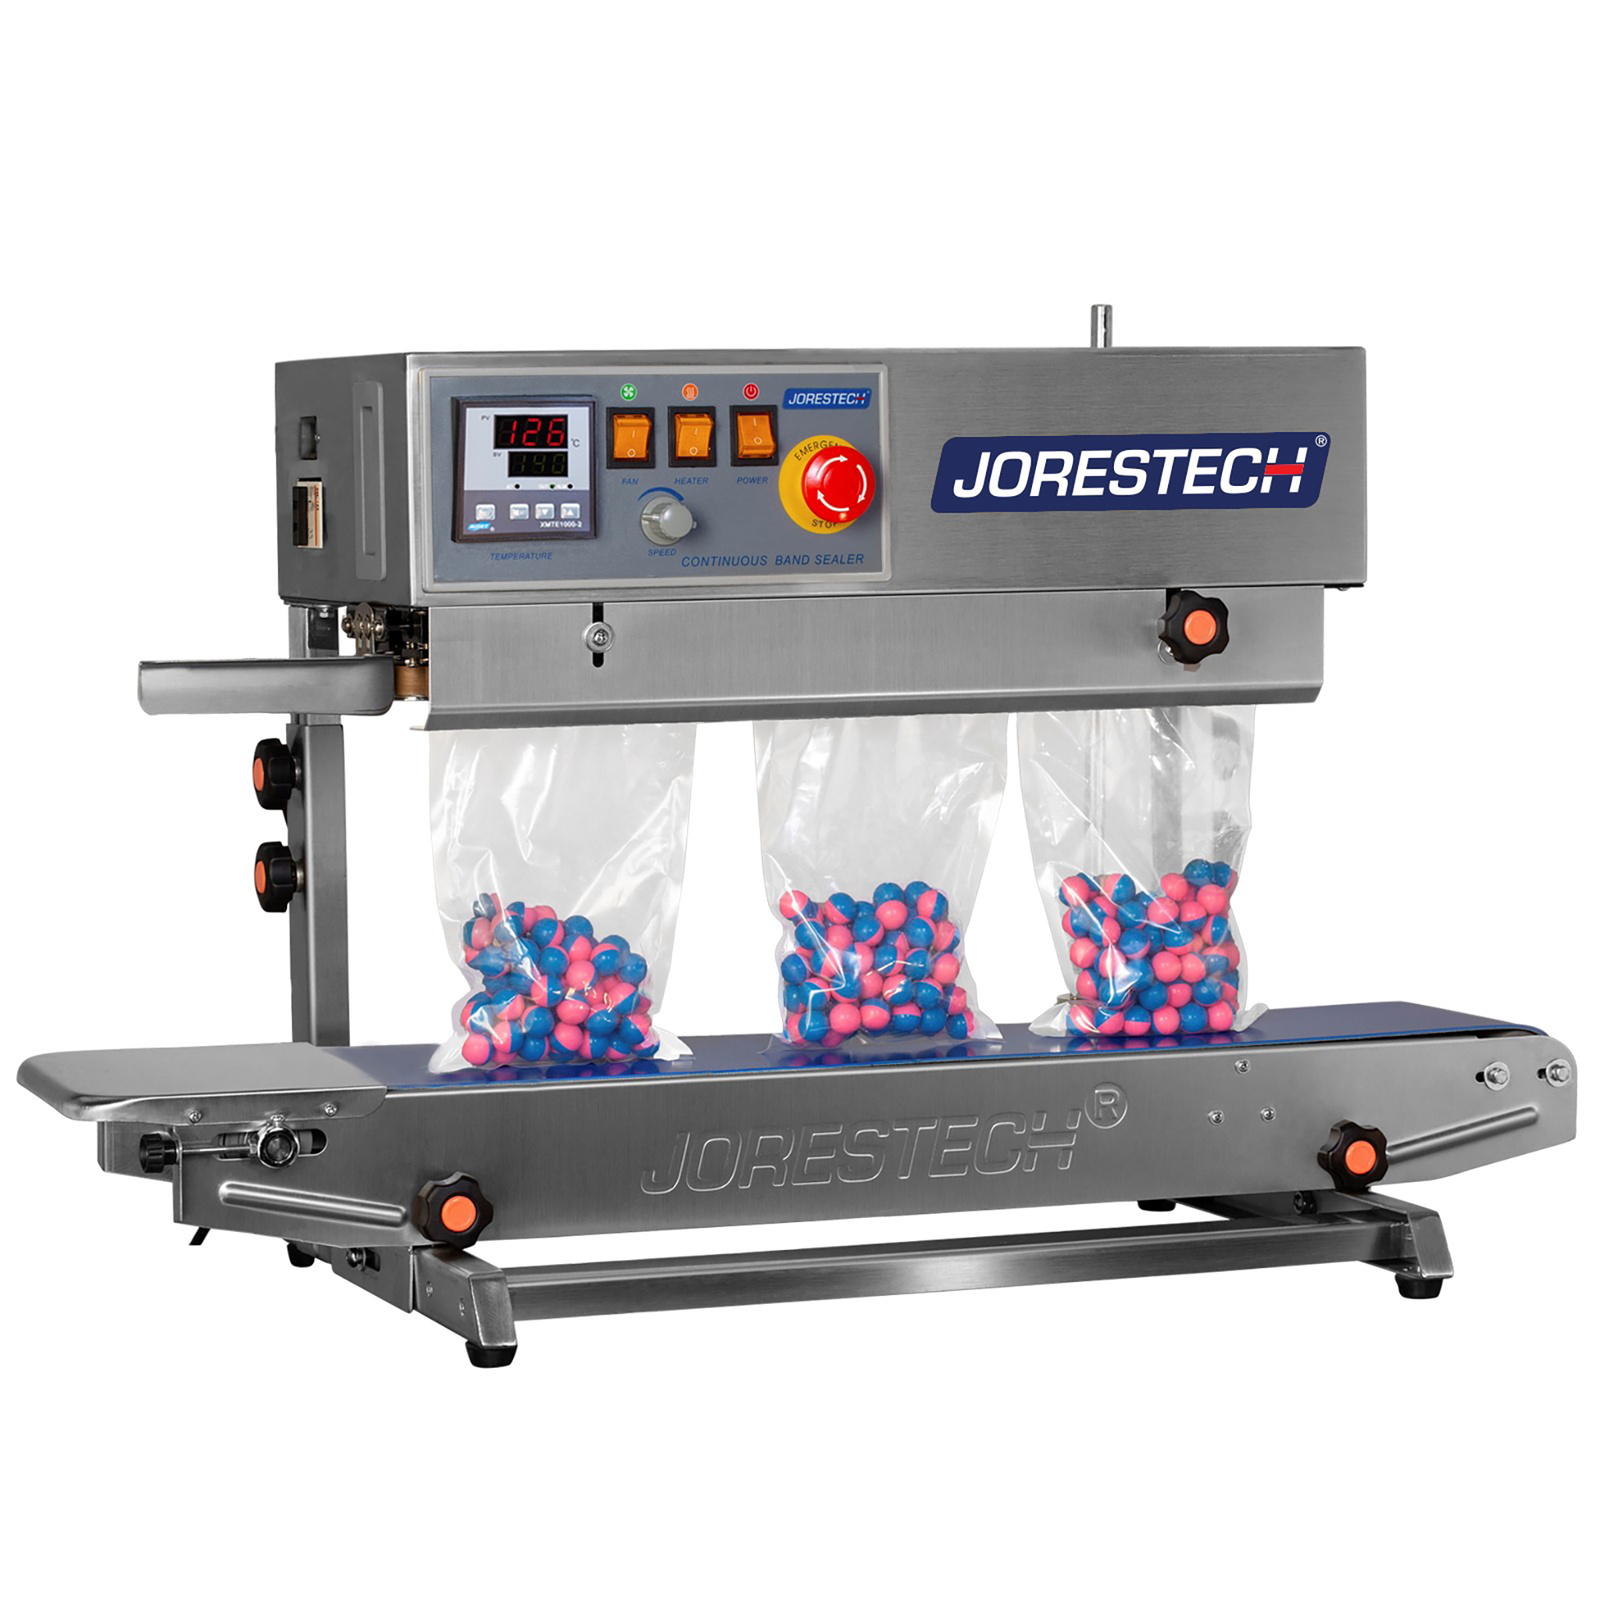 JORES TECHNOLOGIES® left to right stainless steel continuous band sealer. The table top Vertical bag sealer is sealing a production of plastic bags filled with blue and pink paint balls